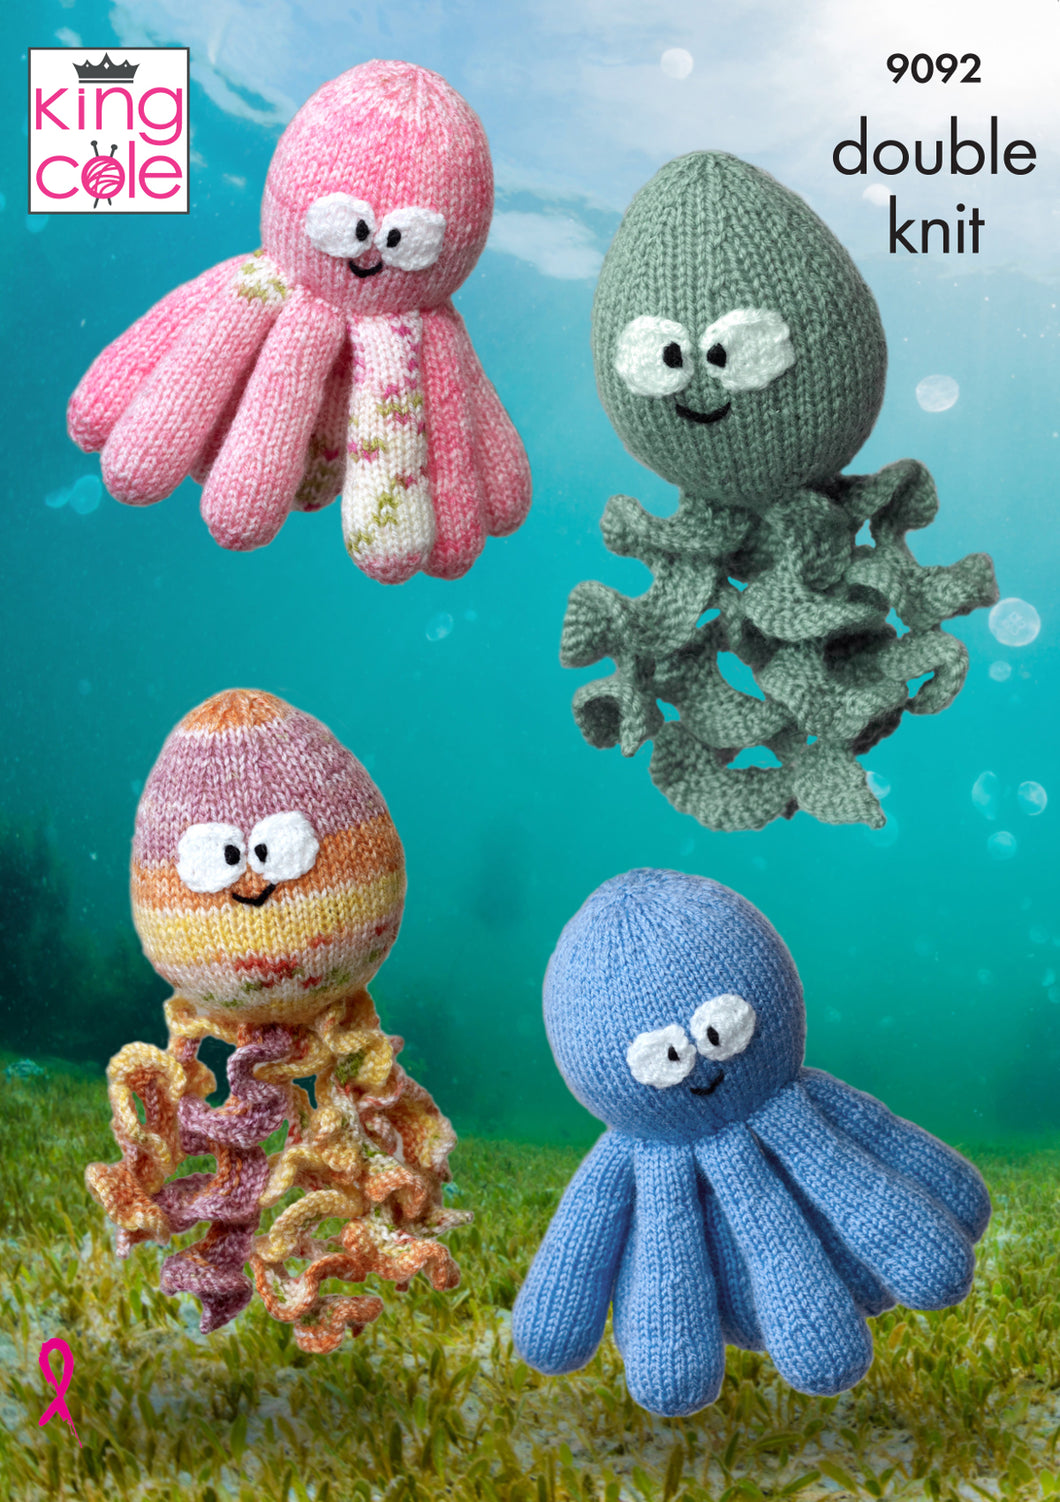 King Cole Double Knitting Pattern - Octopus & Squid Toys (9092)